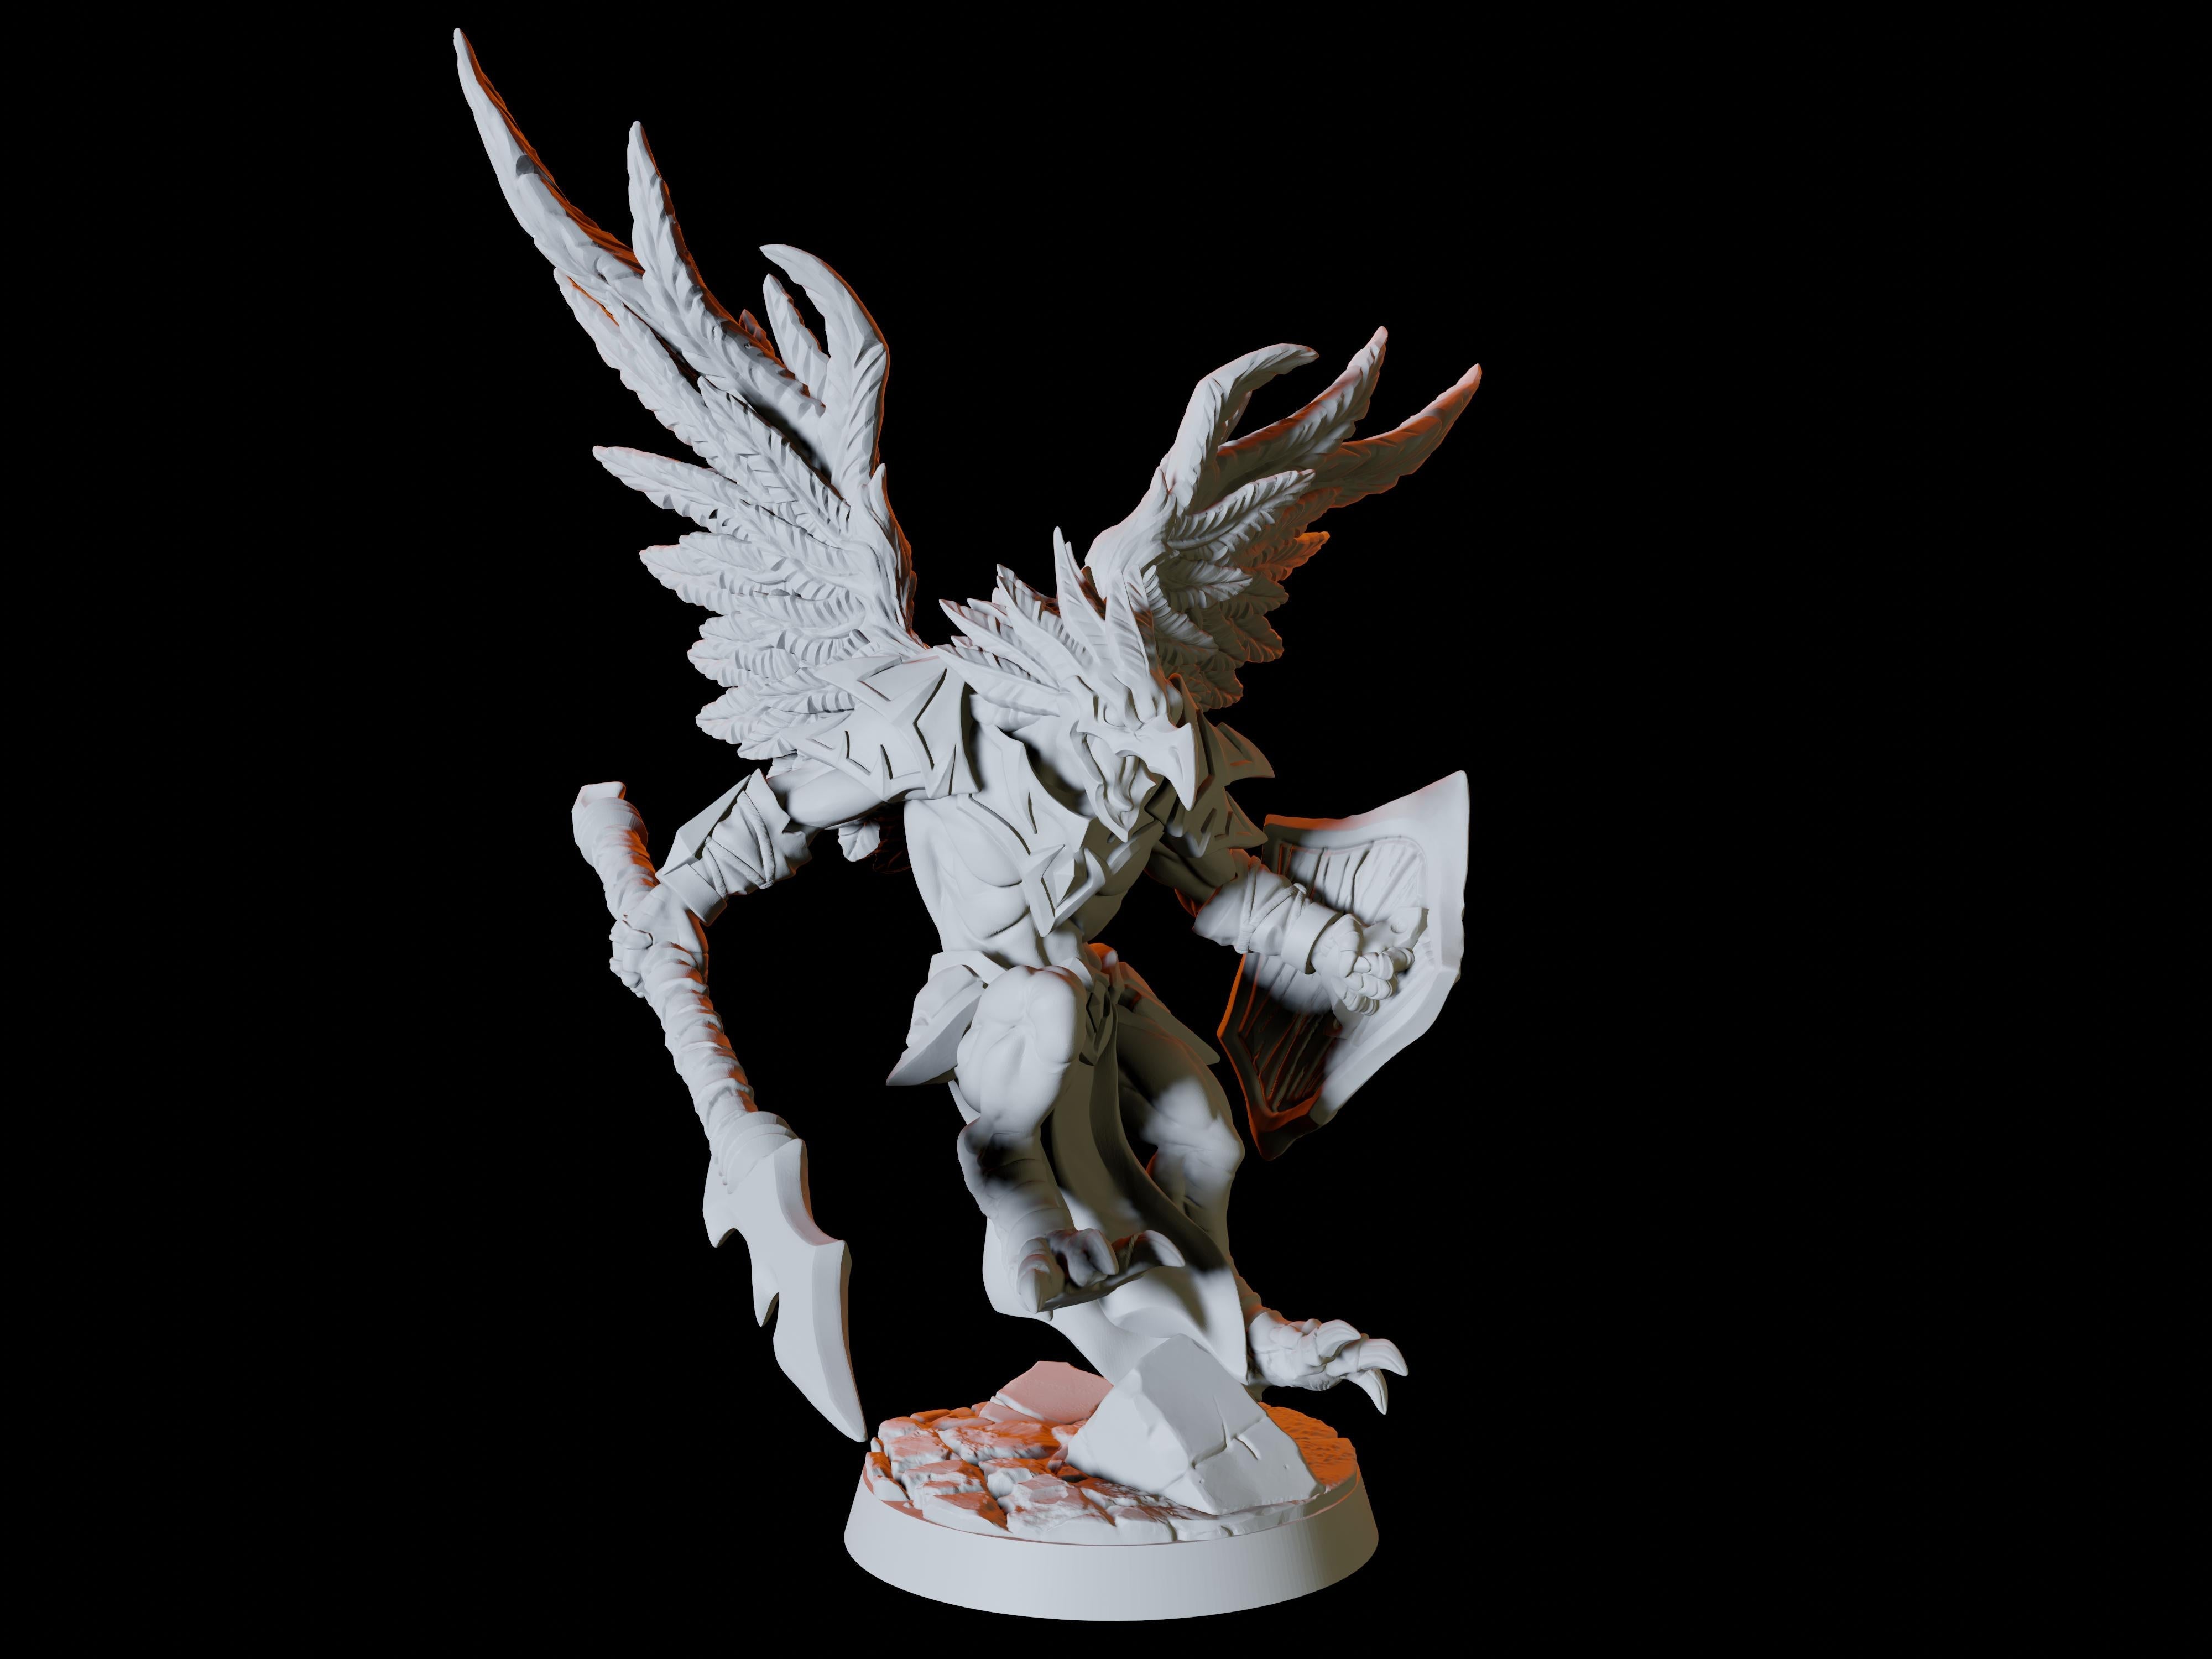 Aarakocra Miniatures for Dungeons and Dragons. There are six soldiers, printed by Myth Forged